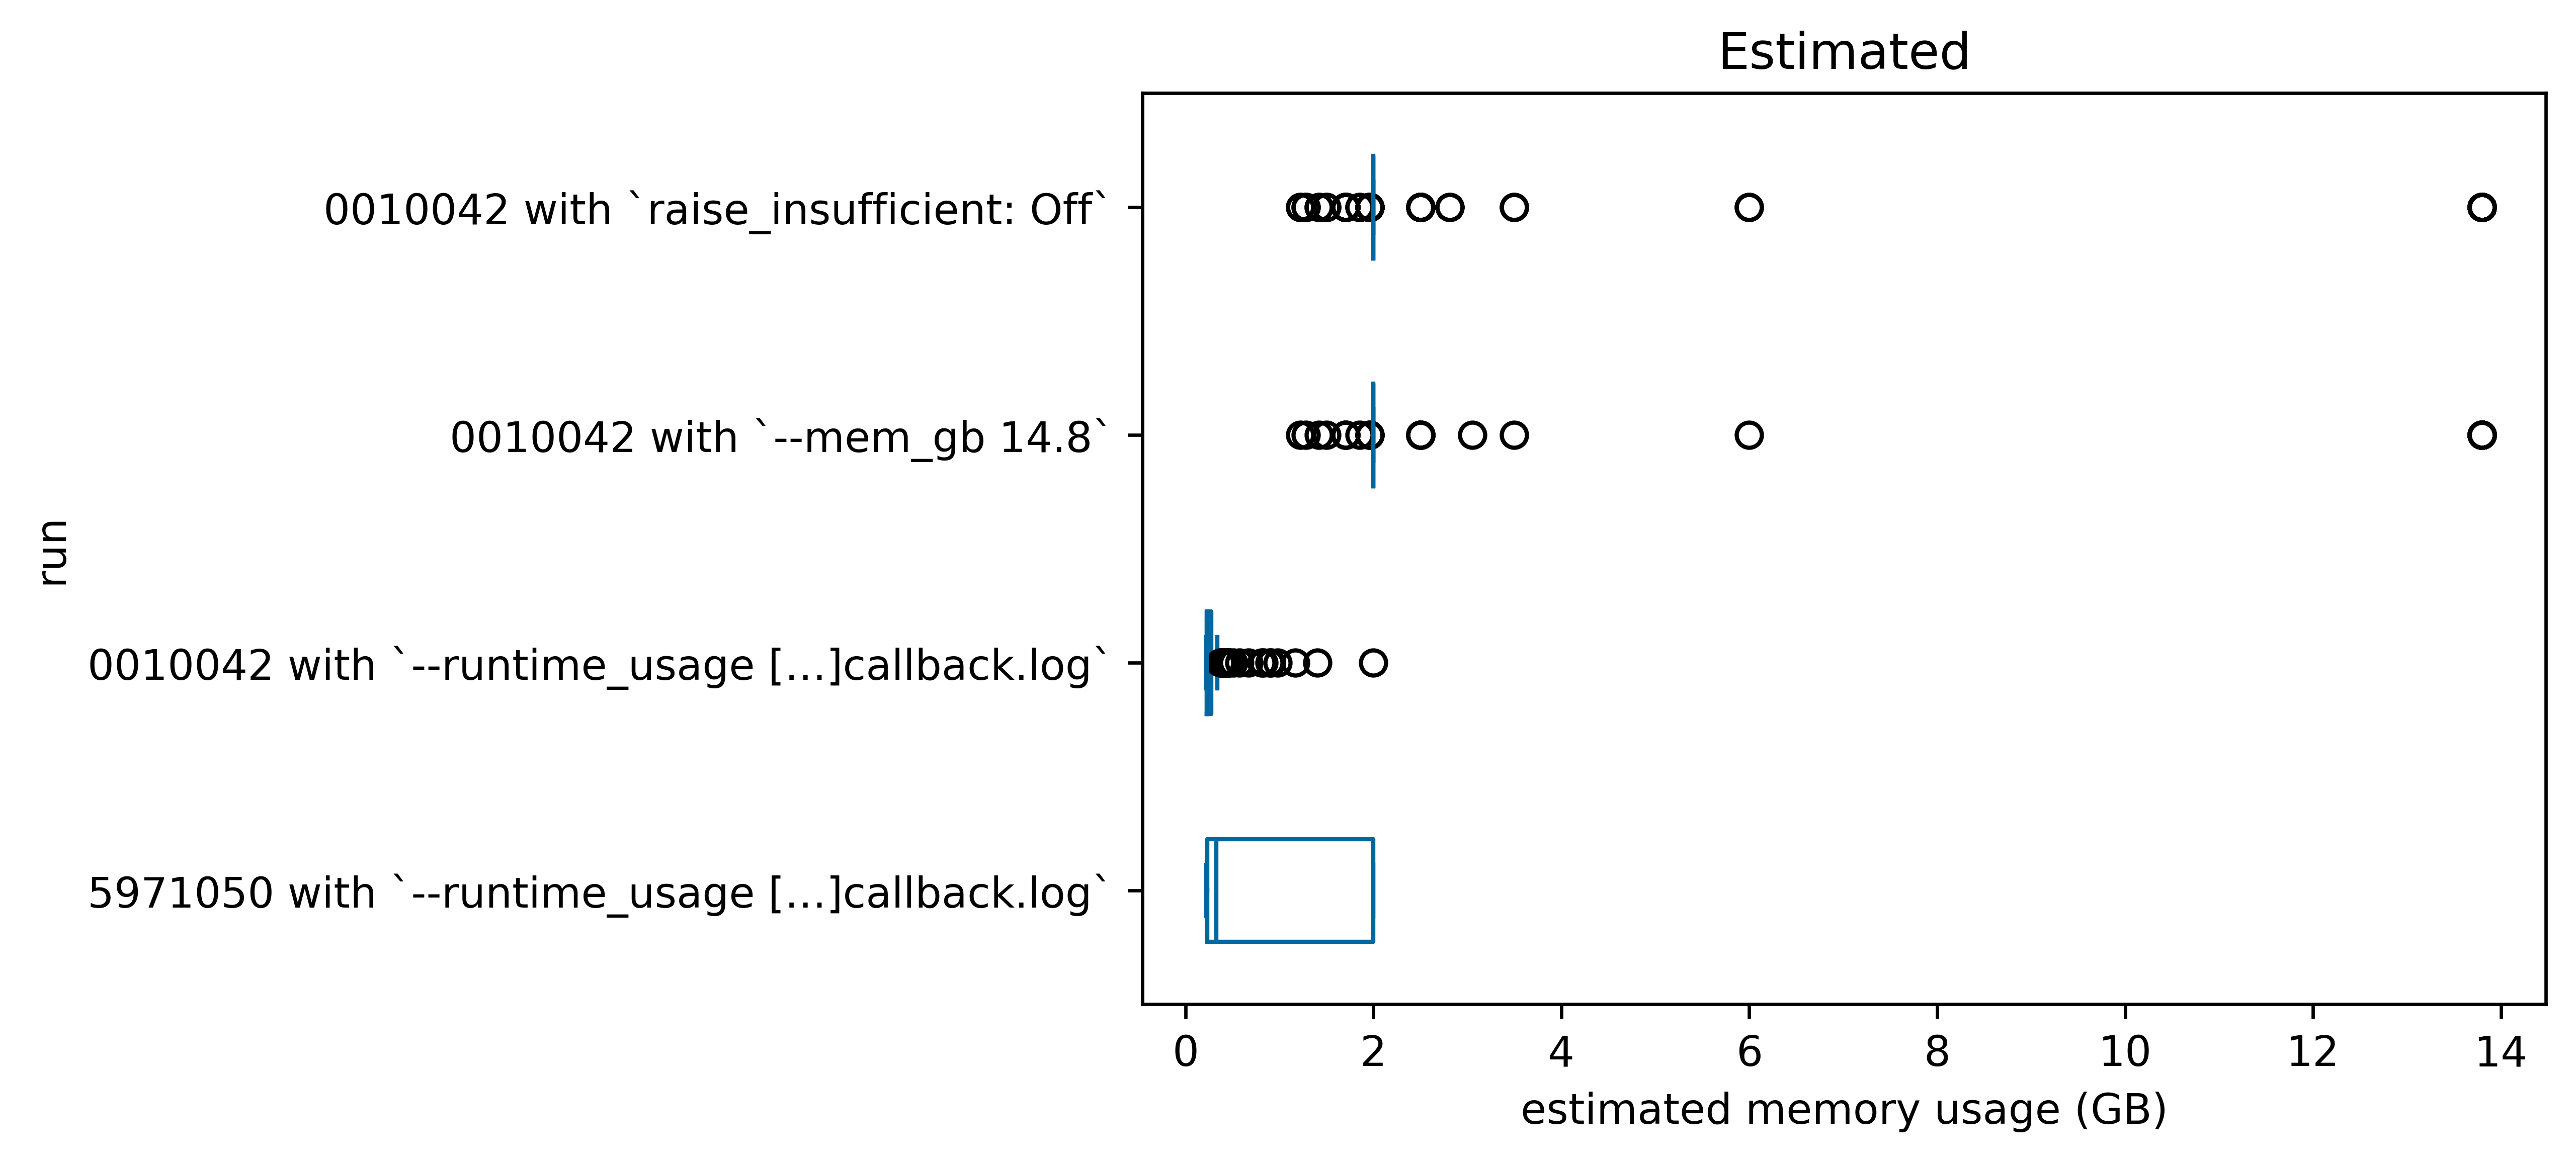 Box-and-whisker plot of estimated memory usage